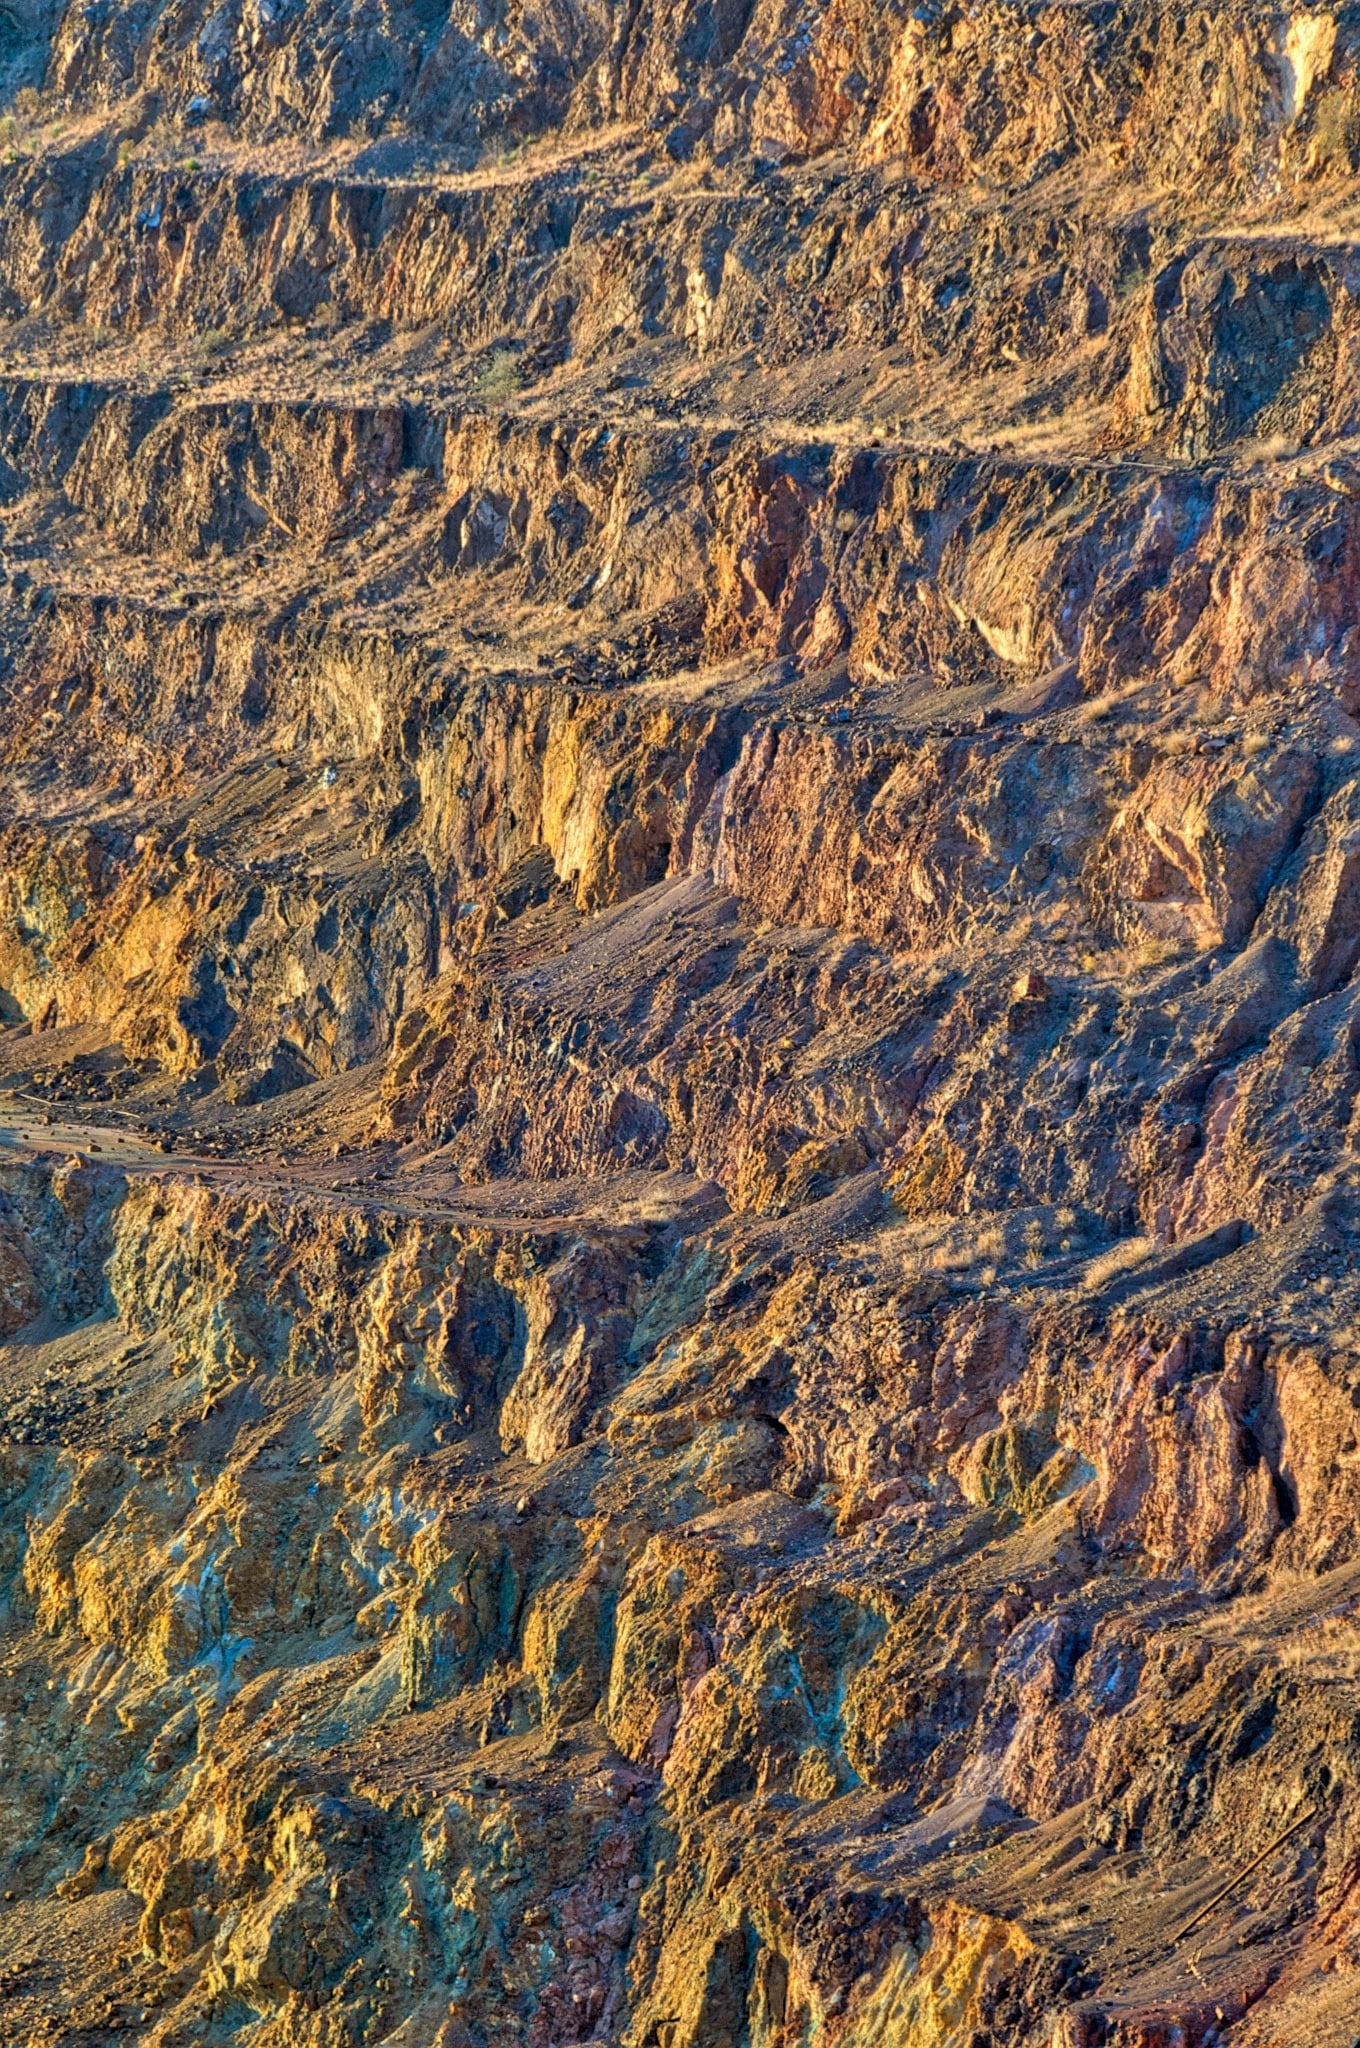 This is a close-up view of the terraces in the Lavender Pit Mine in Bisbee, Arizona.